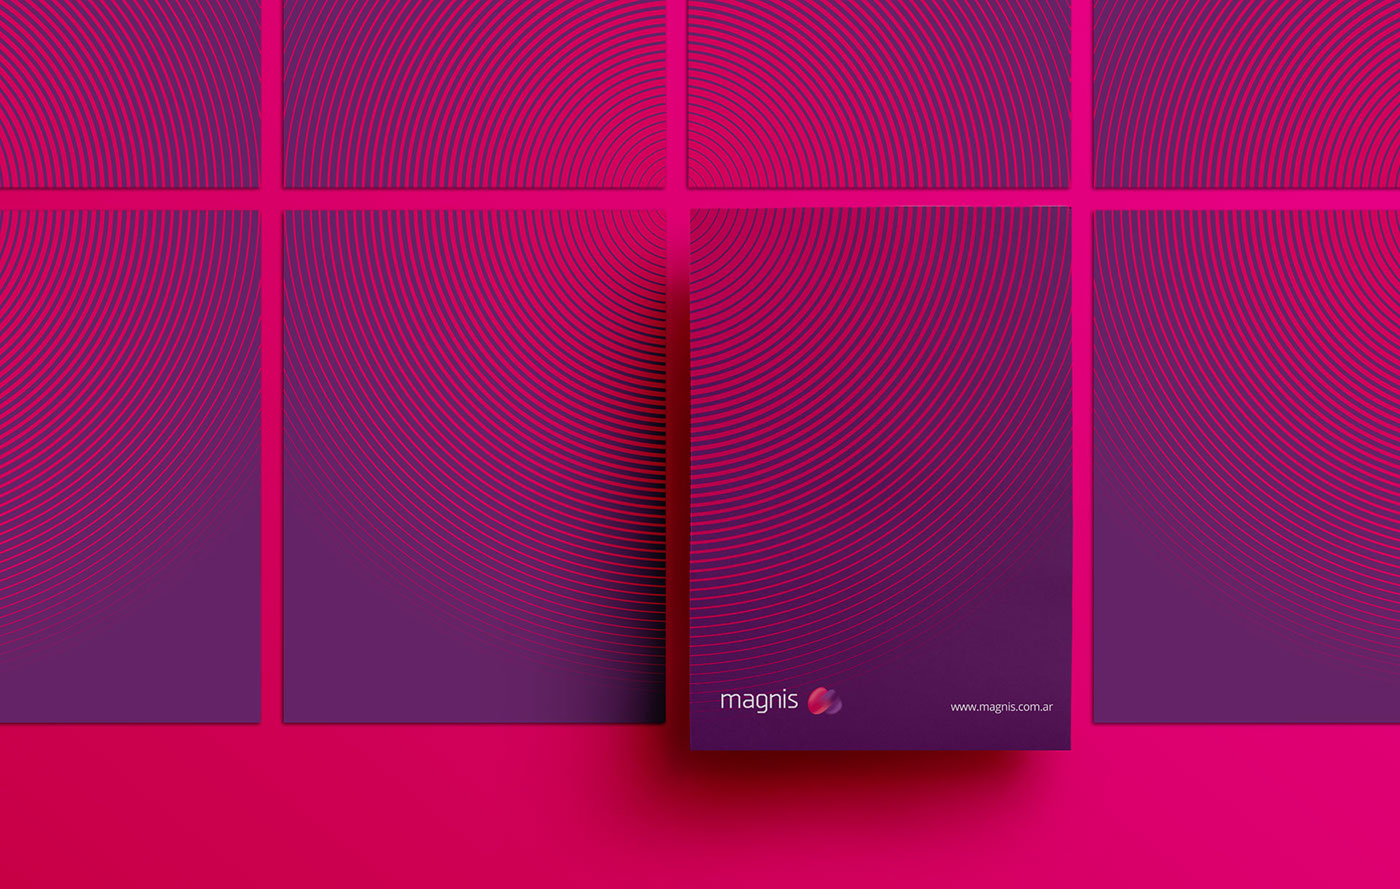 Icon design, brochure and institutional folder for Magnis